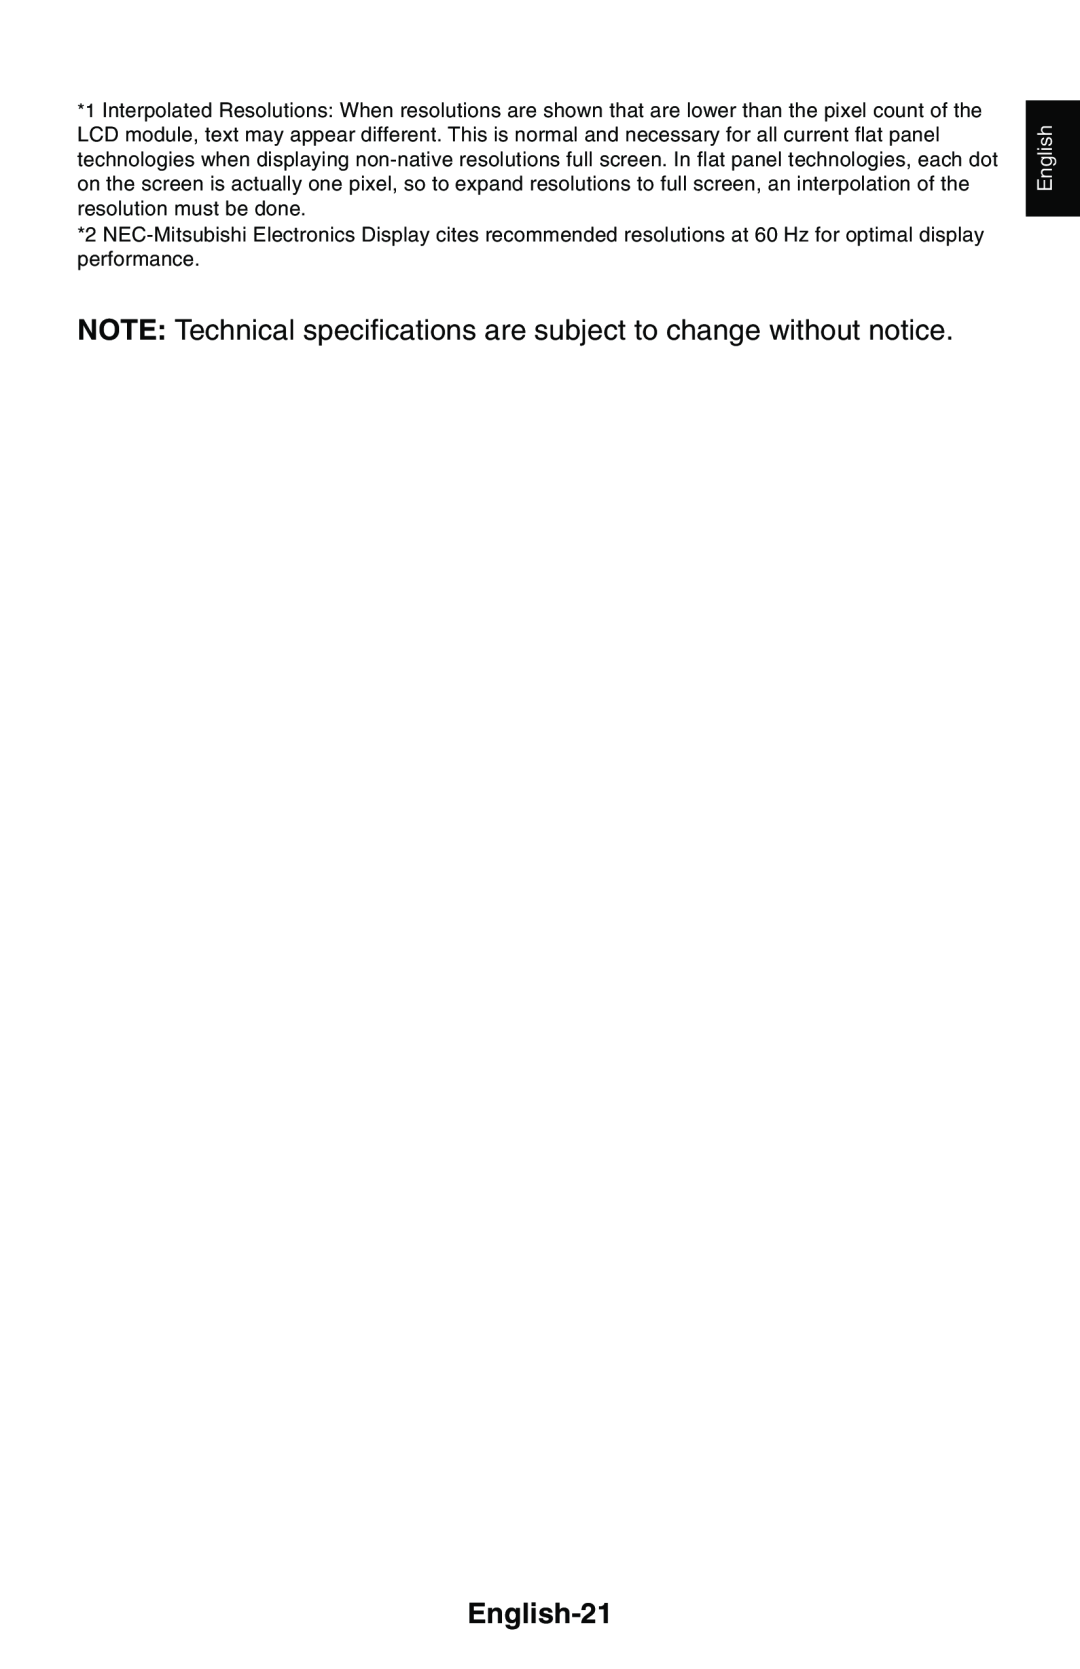 NEC LCD1850E user manual NOTE Technical specifications are subject to change without notice, English-21 